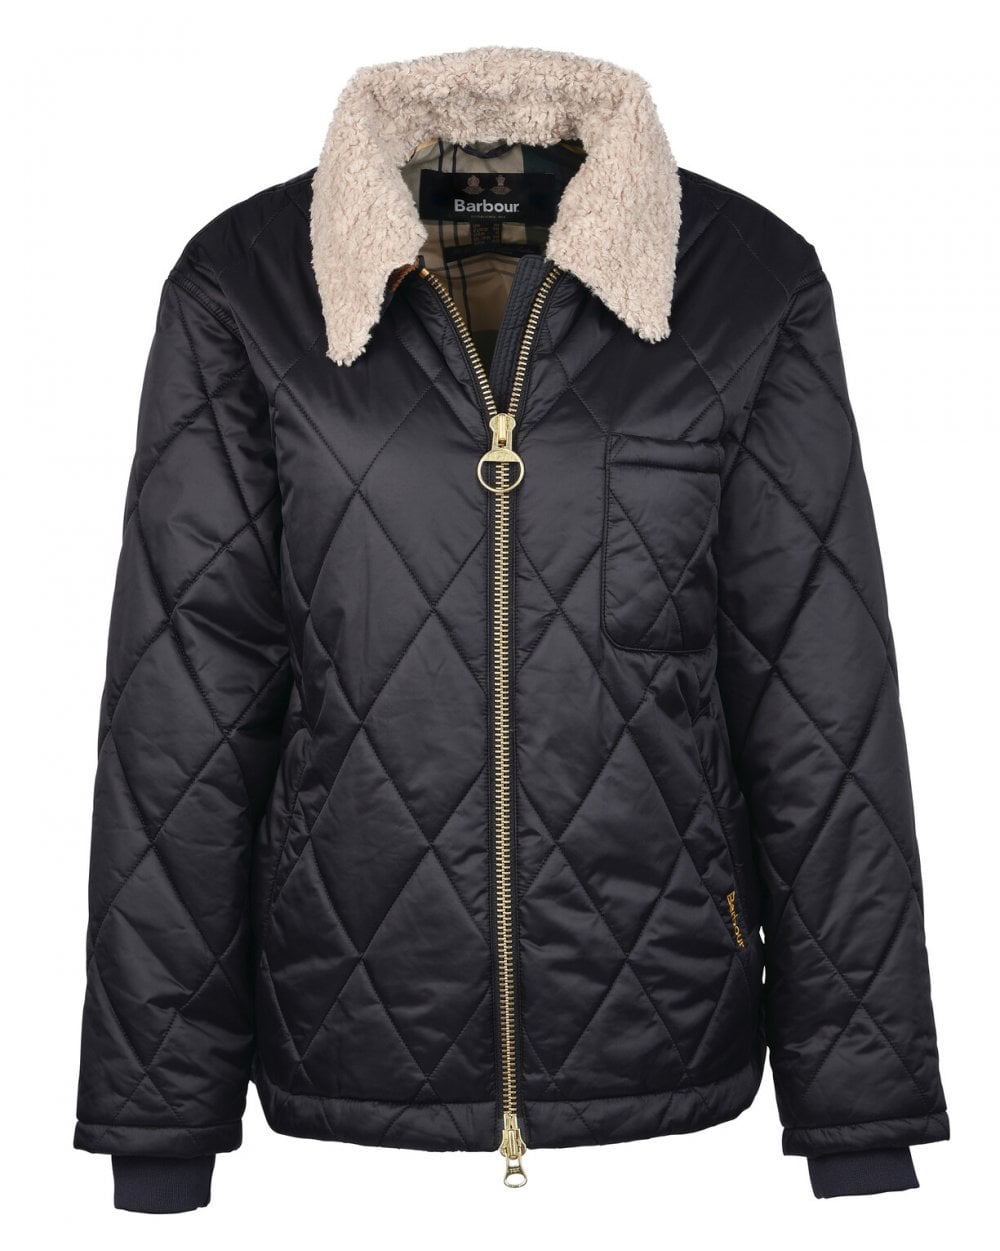 Vaila Quilted Jacket